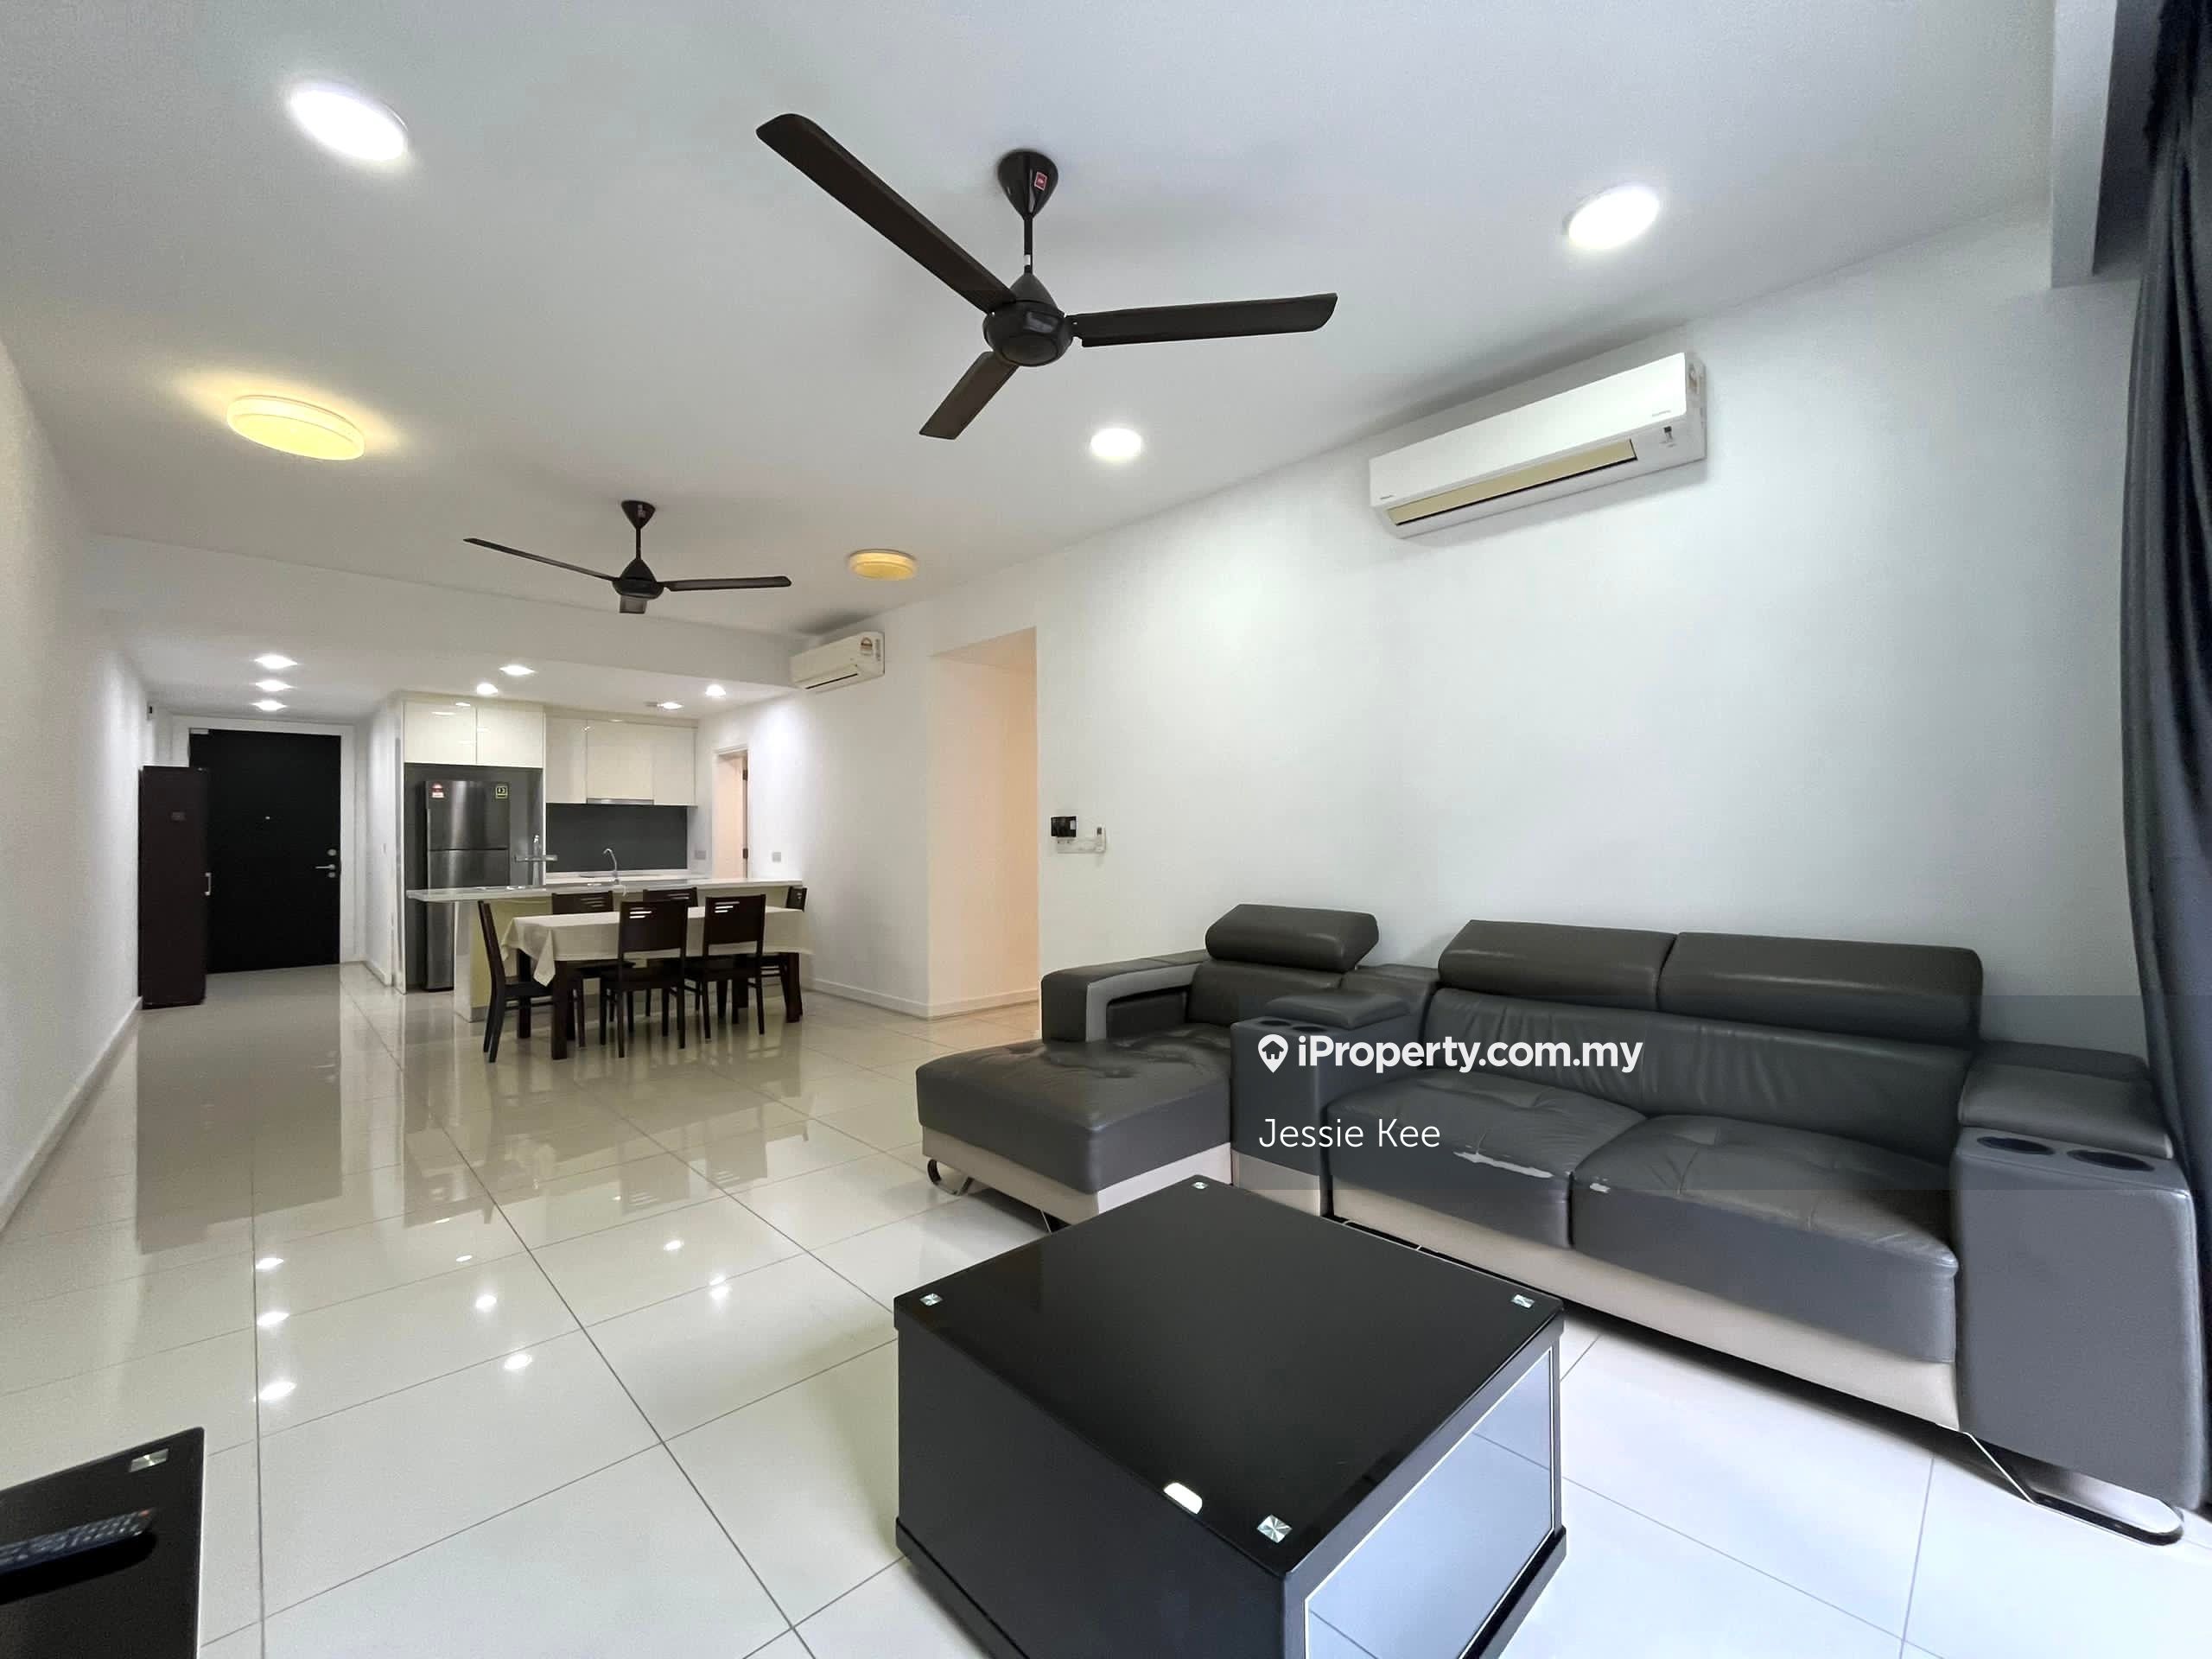 Fully Furnished Condominium For Rent!